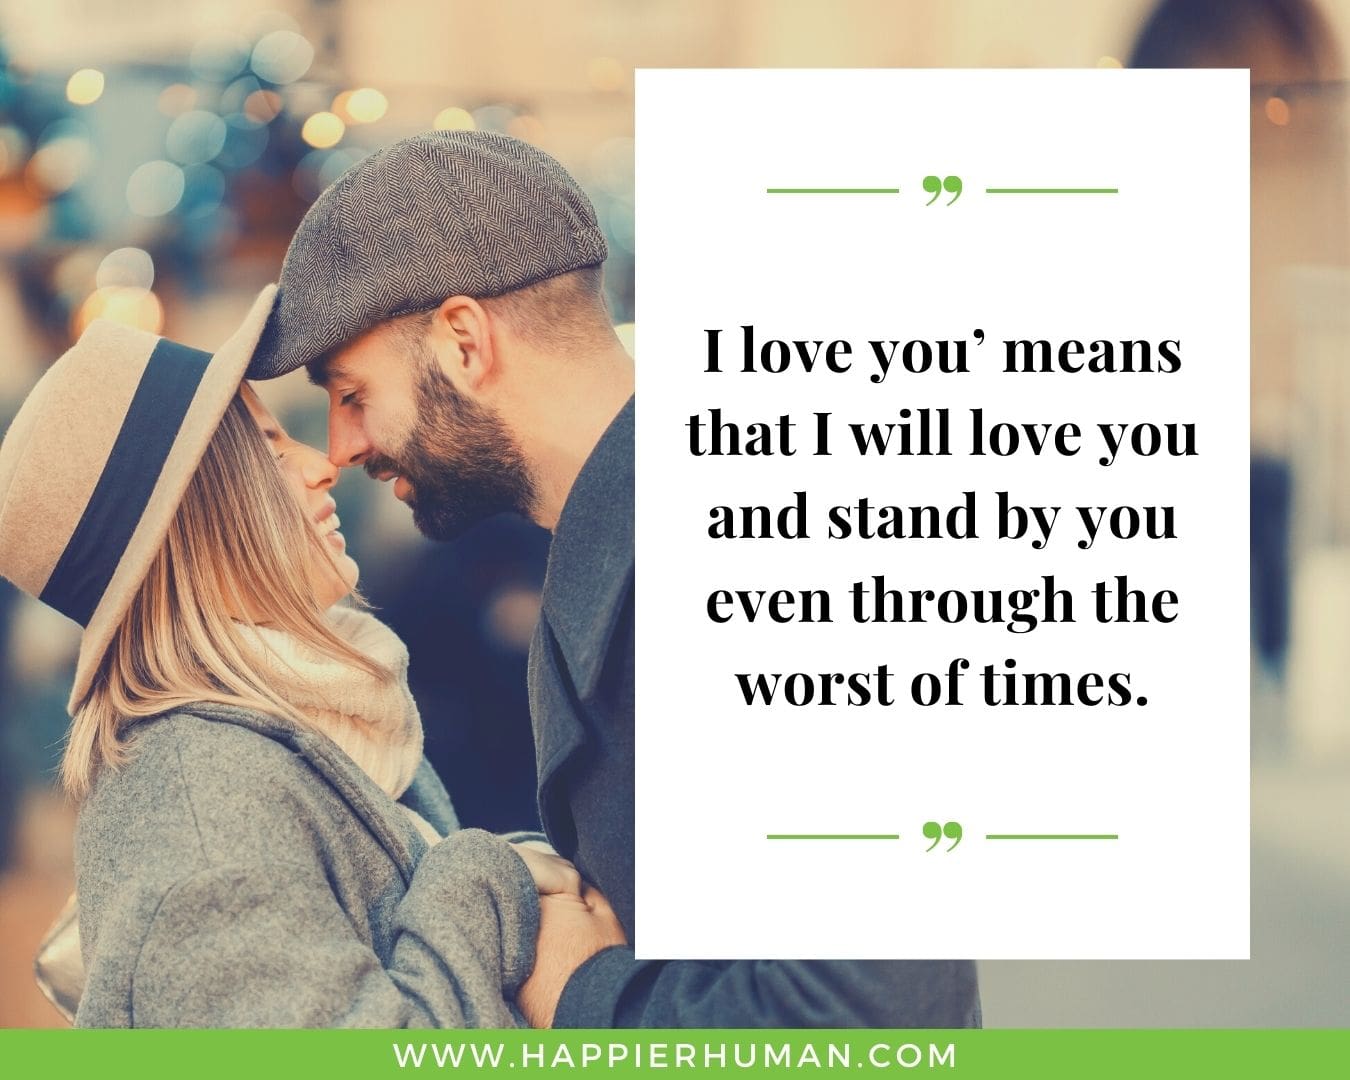 Unconditional Love Quotes for Her - “’I love you’ means that I will love you and stand by you even through the worst of times.”